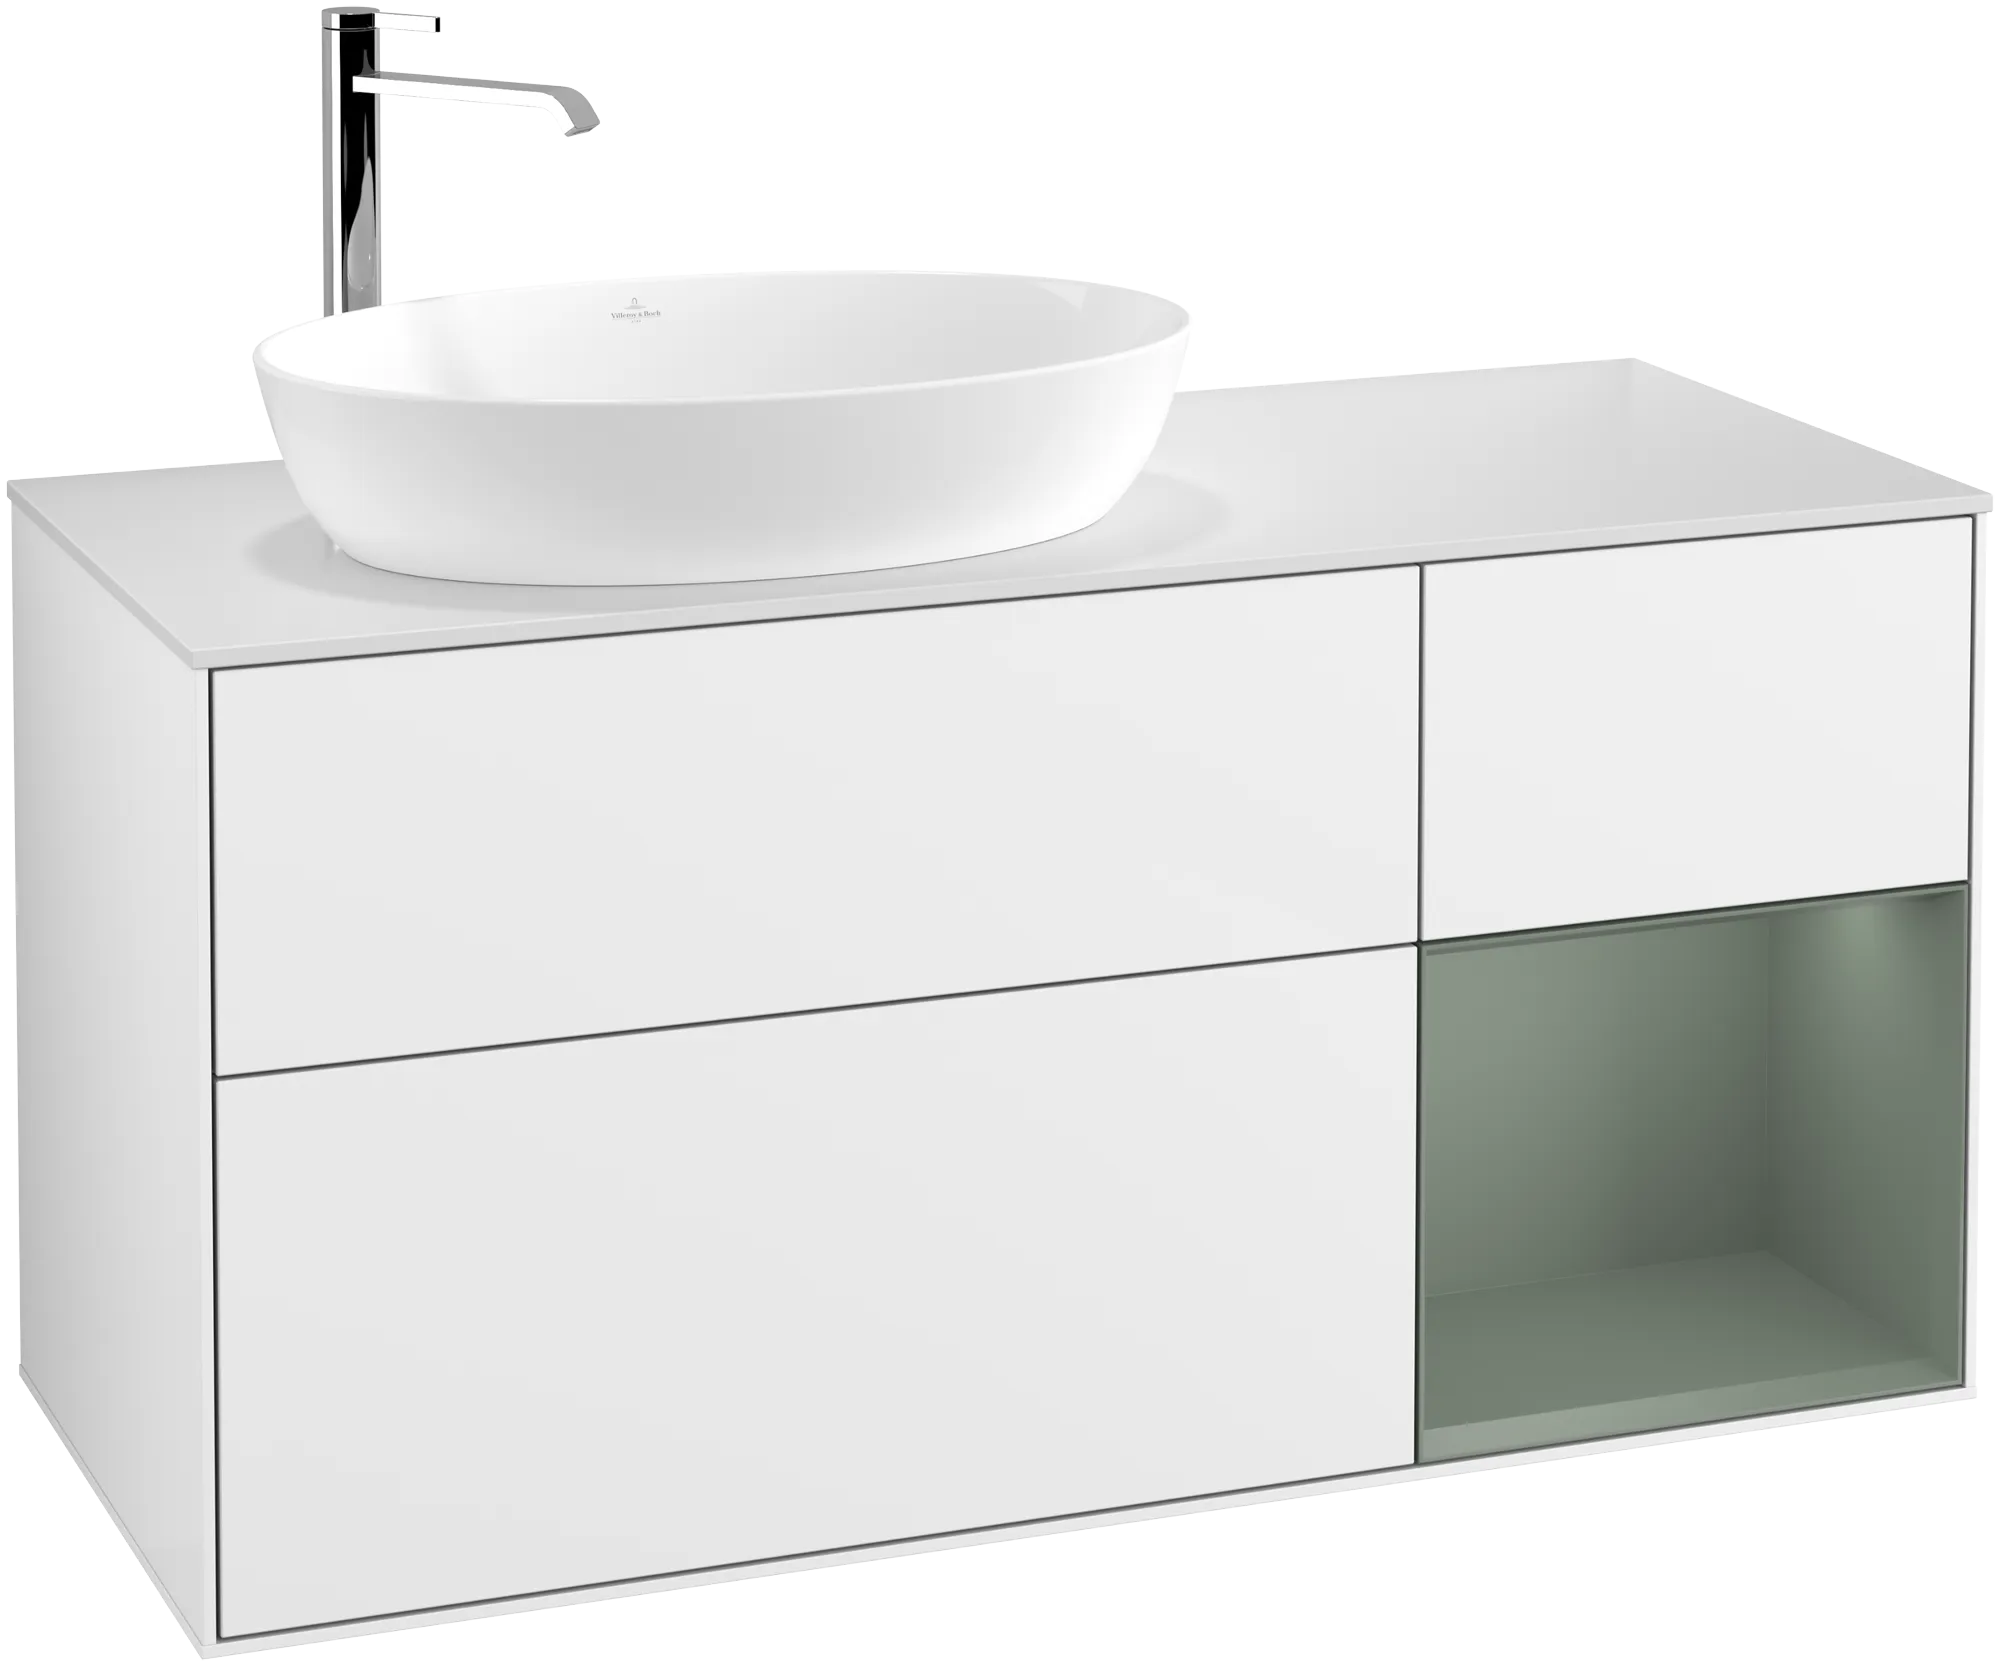 Зображення з  VILLEROY BOCH Finion Vanity unit, with lighting, 3 pull-out compartments, 1200 x 603 x 501 mm, Glossy White Lacquer / Olive Matt Lacquer / Glass White Matt #G931GMGF